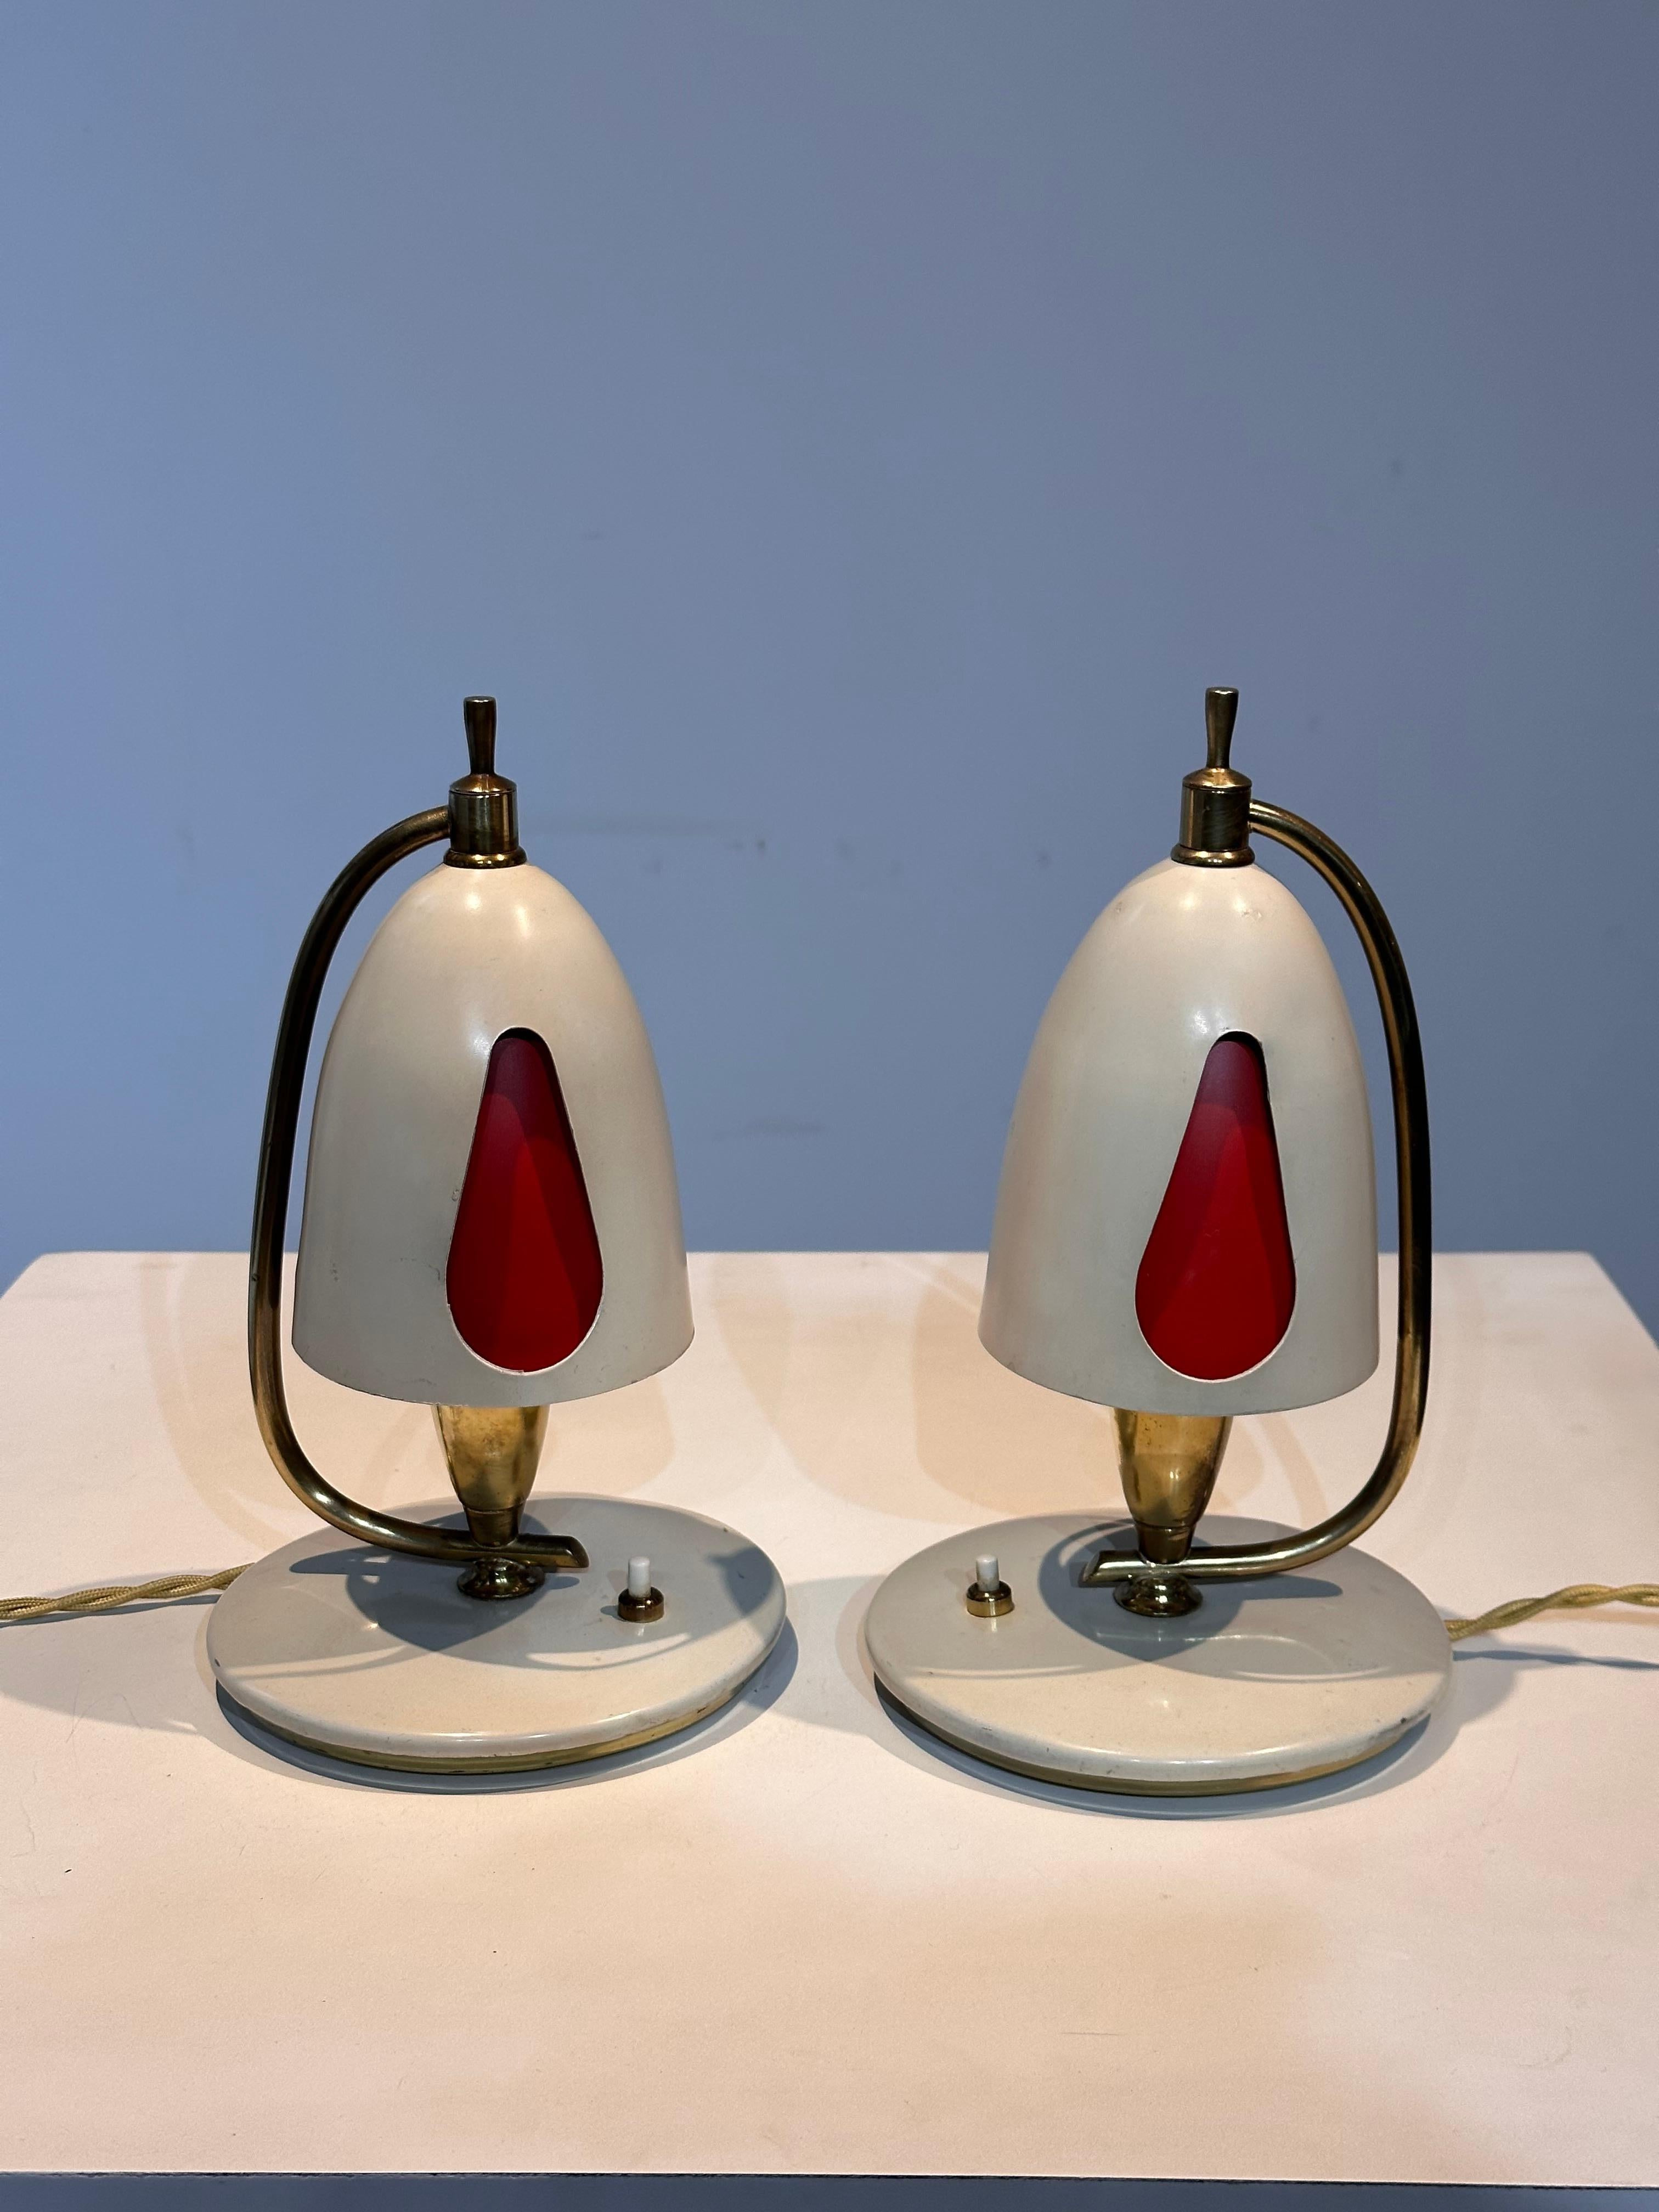 Rare pair of original lampshades designed by Angelo Lelli for Arredoluce.